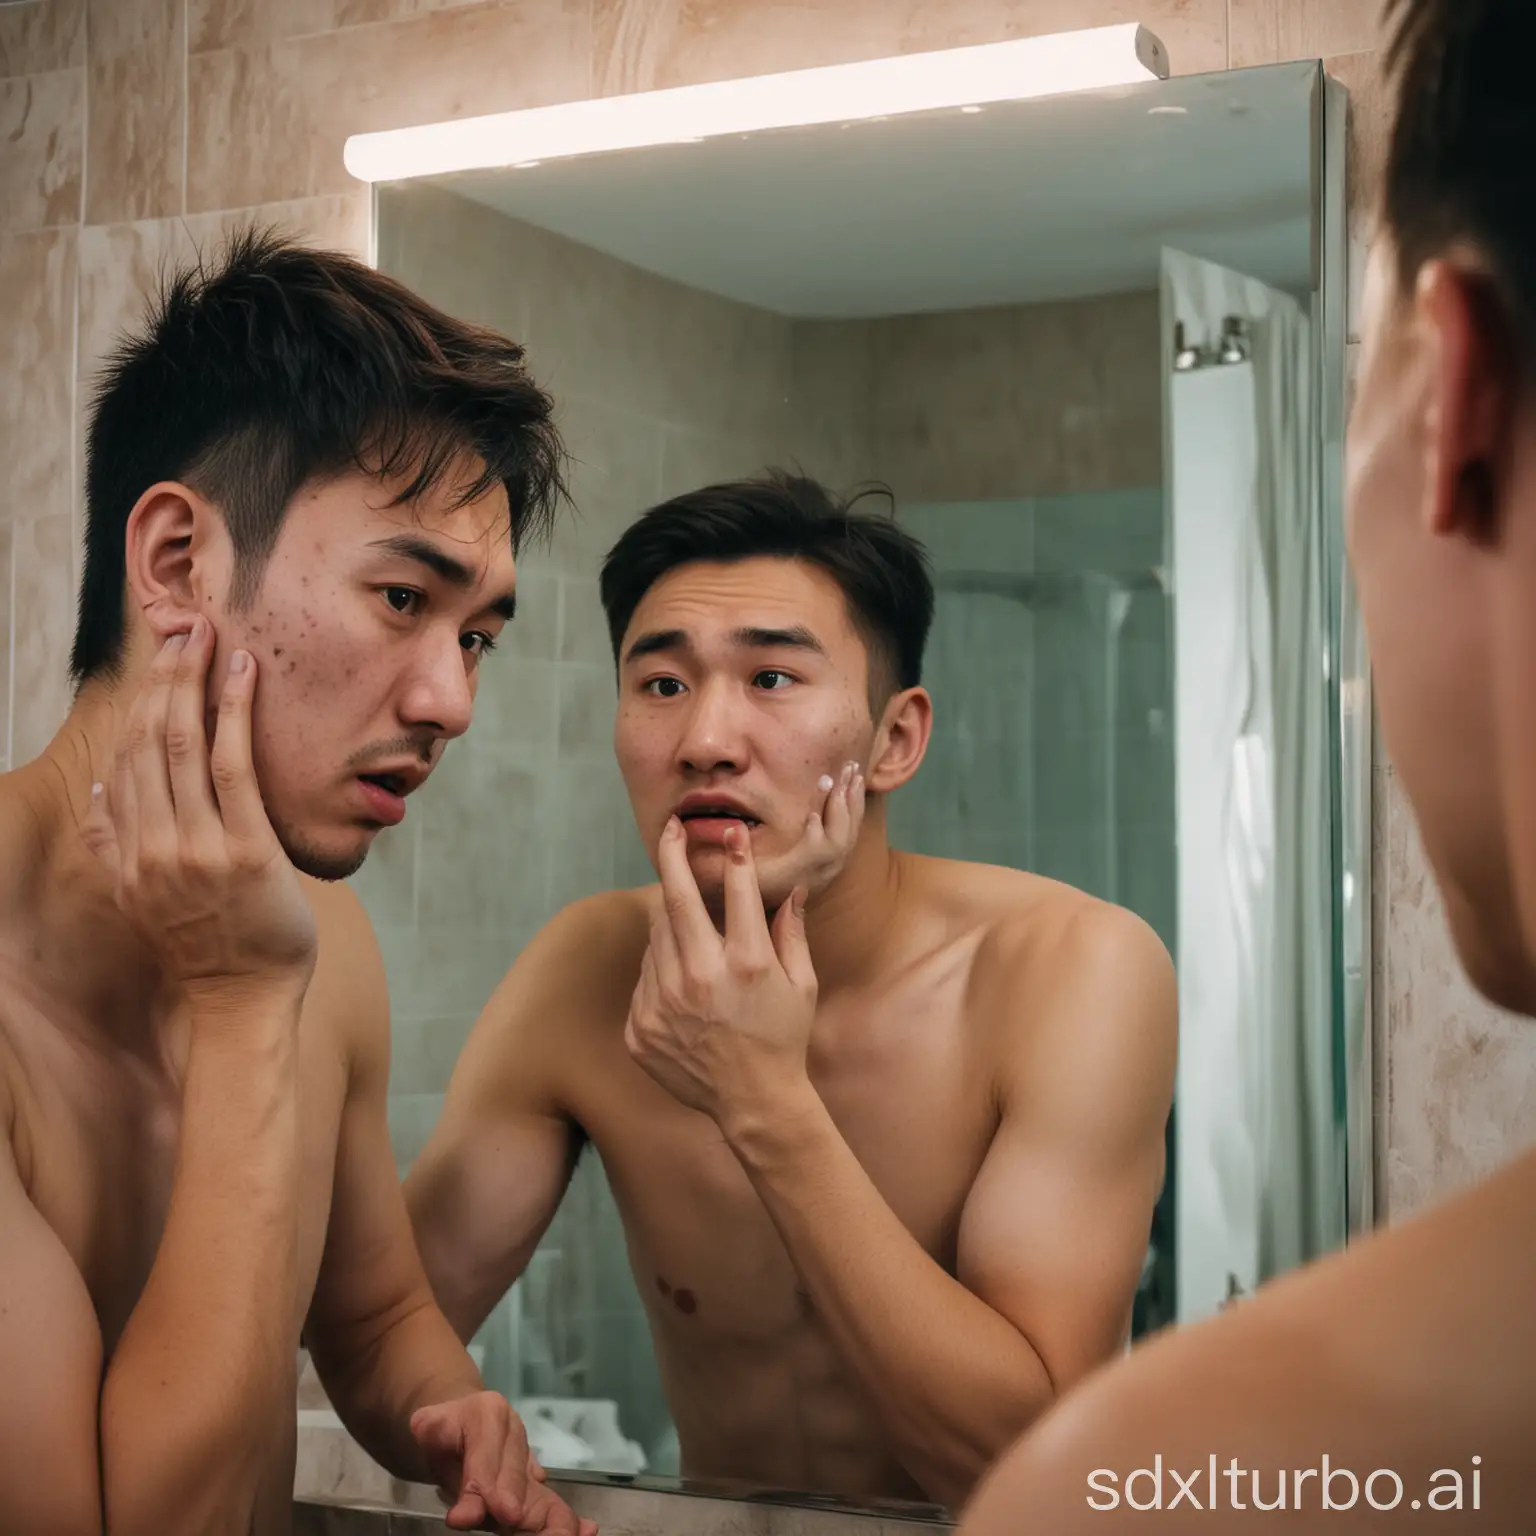 Concerned-Kazakh-Man-Looking-in-Mirror-with-Acne-Worries